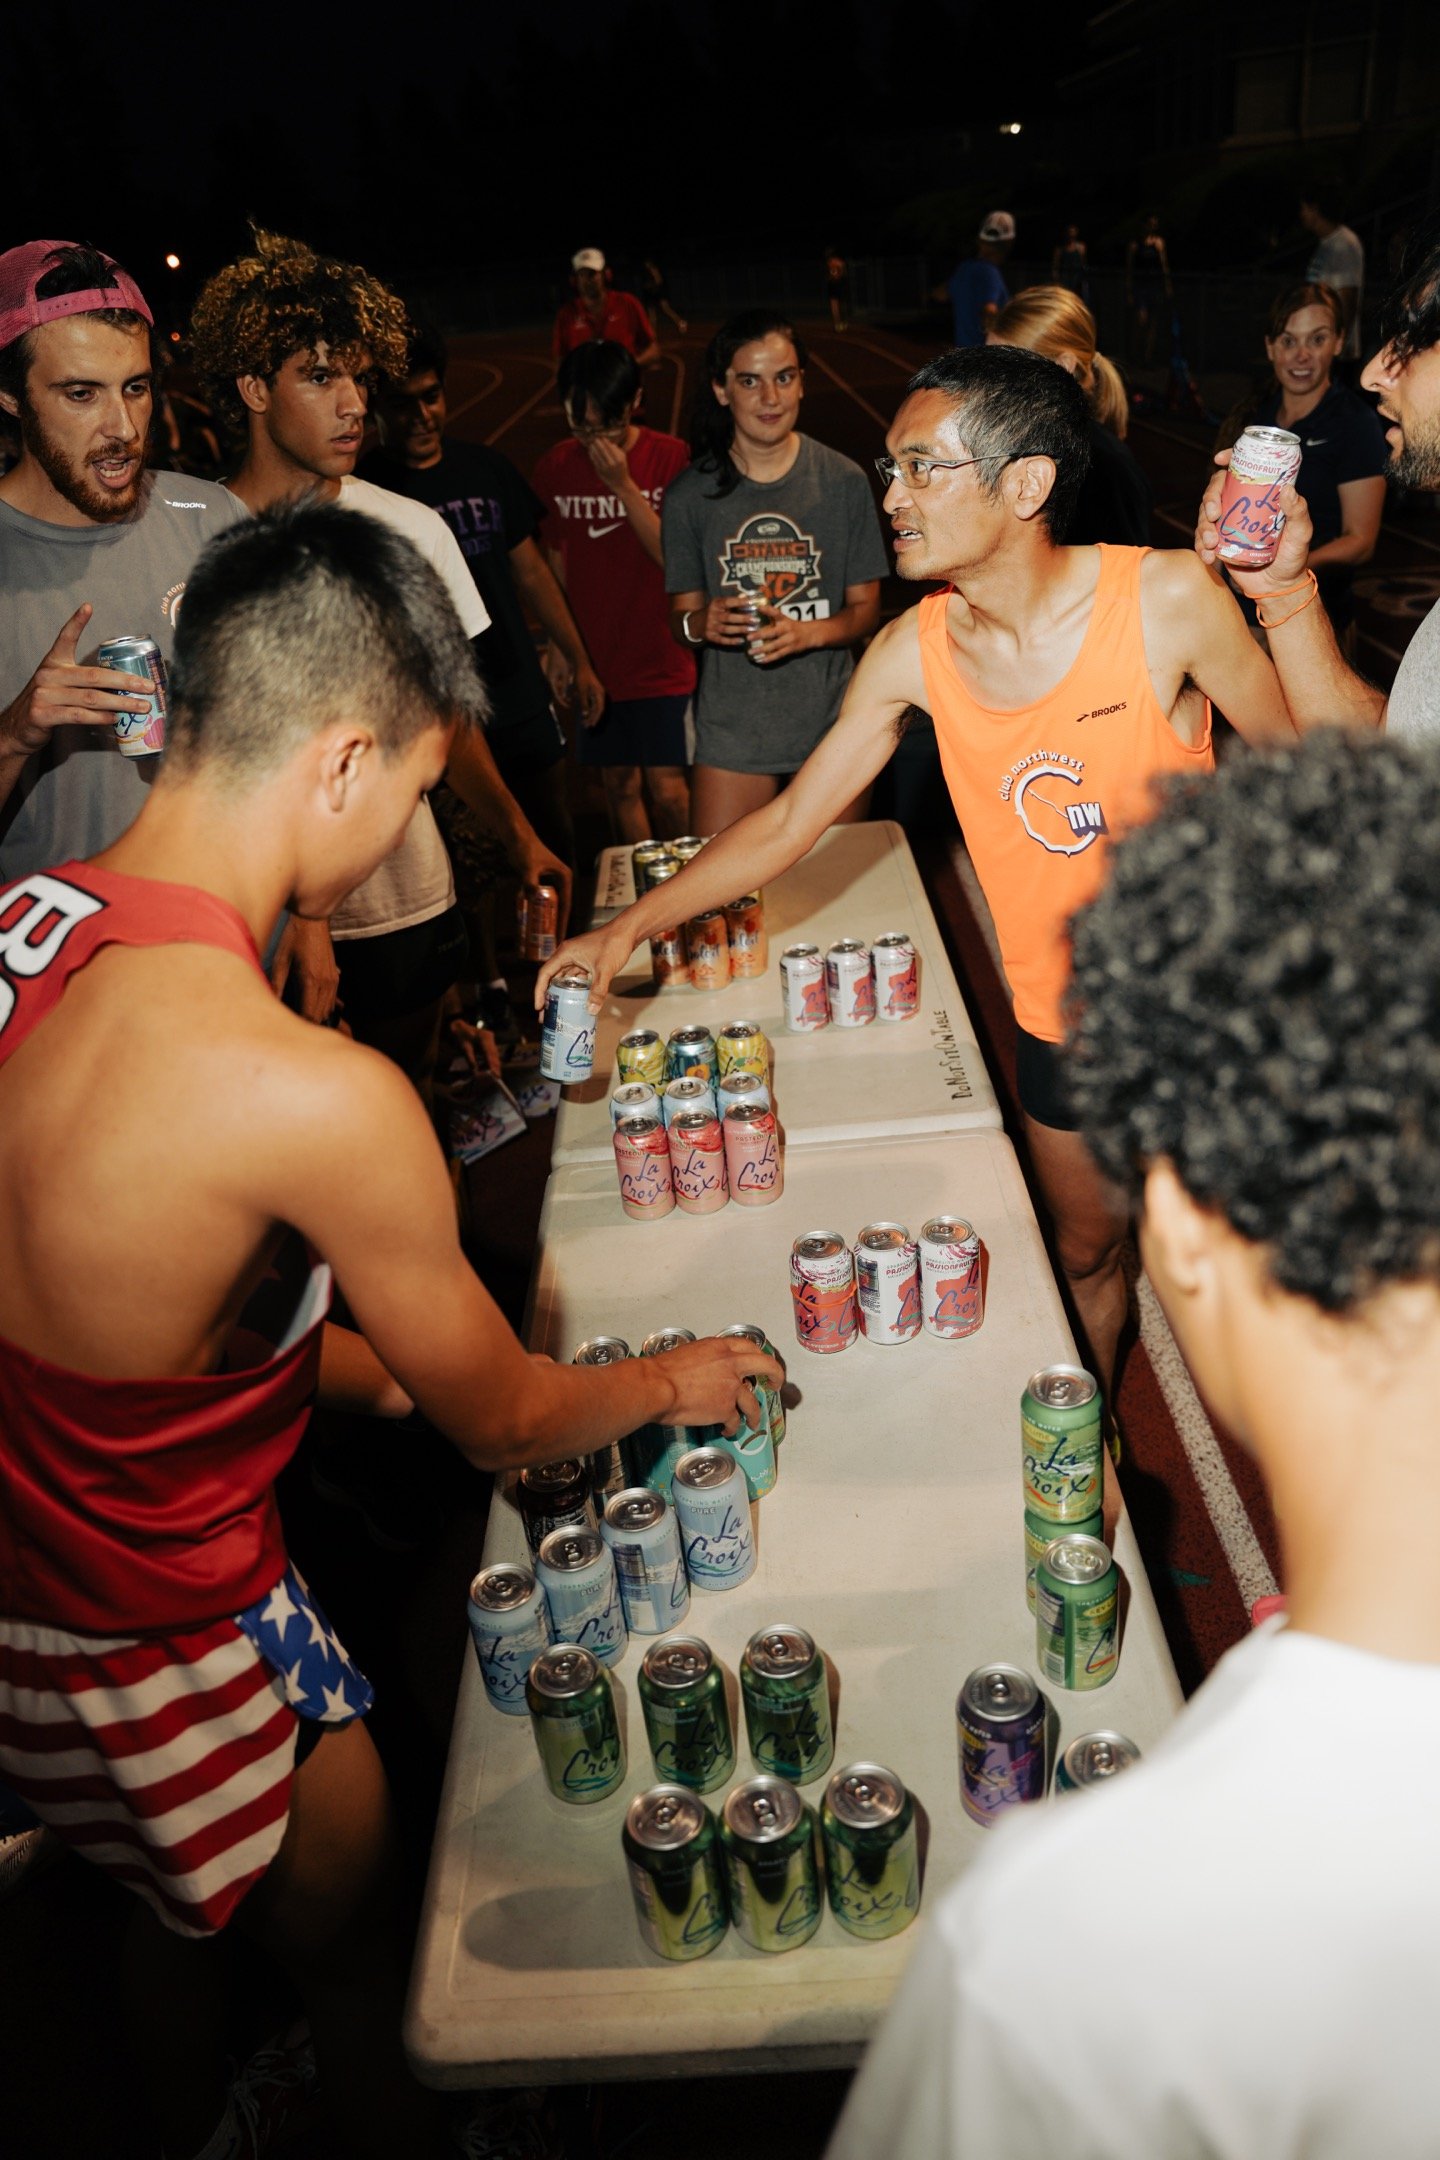 Competitors carefully aligning their cans